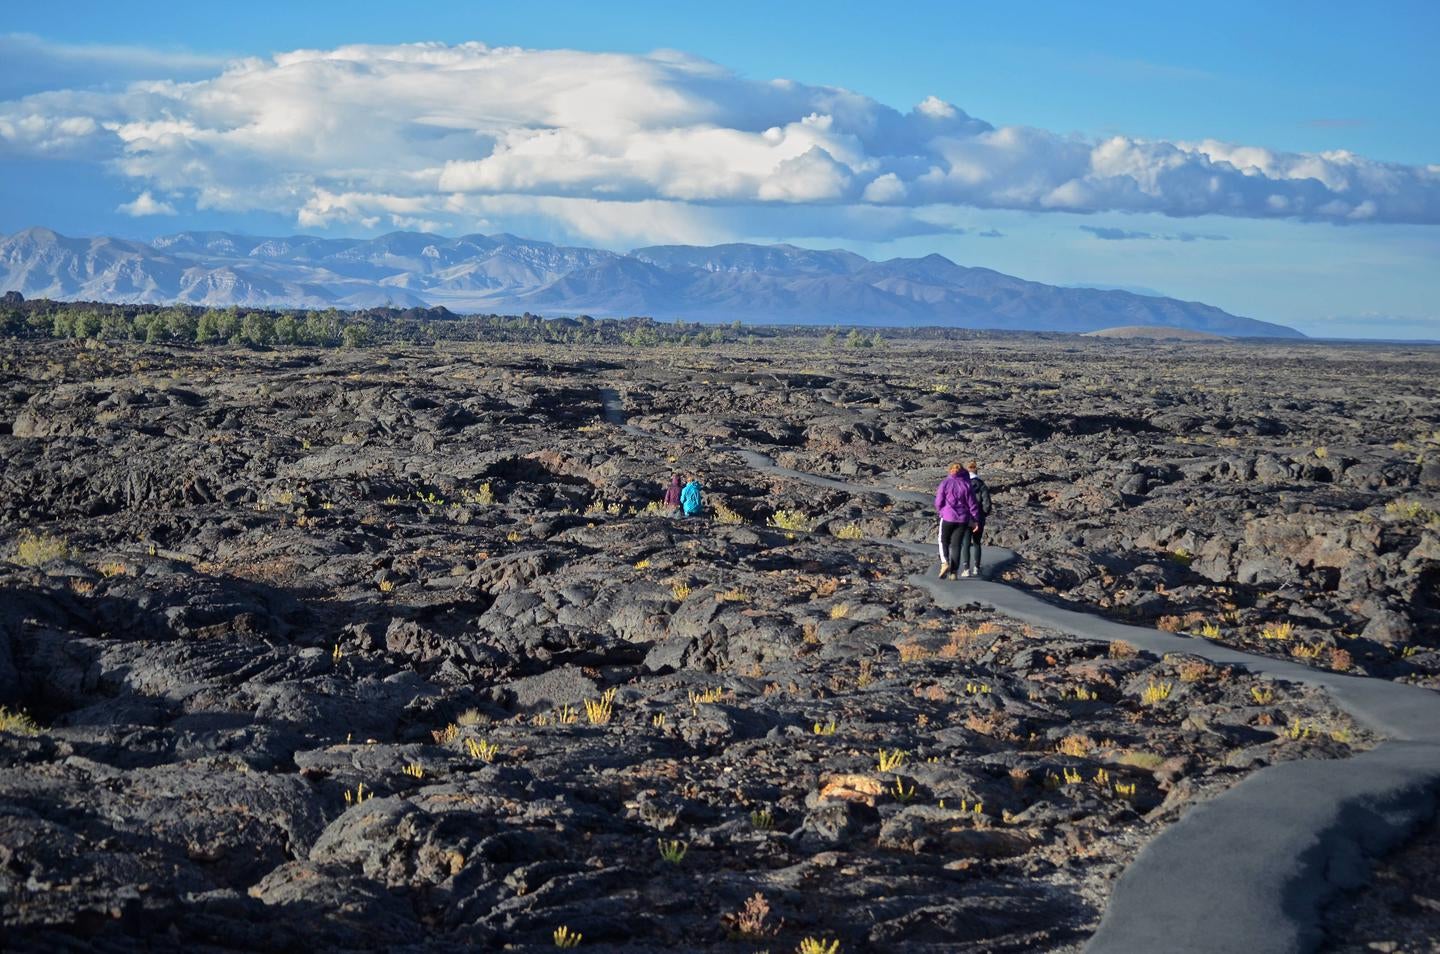 Craters of the Moon

Credit: Share the Experience Photo Contest - Courtesy of Ken Belanger